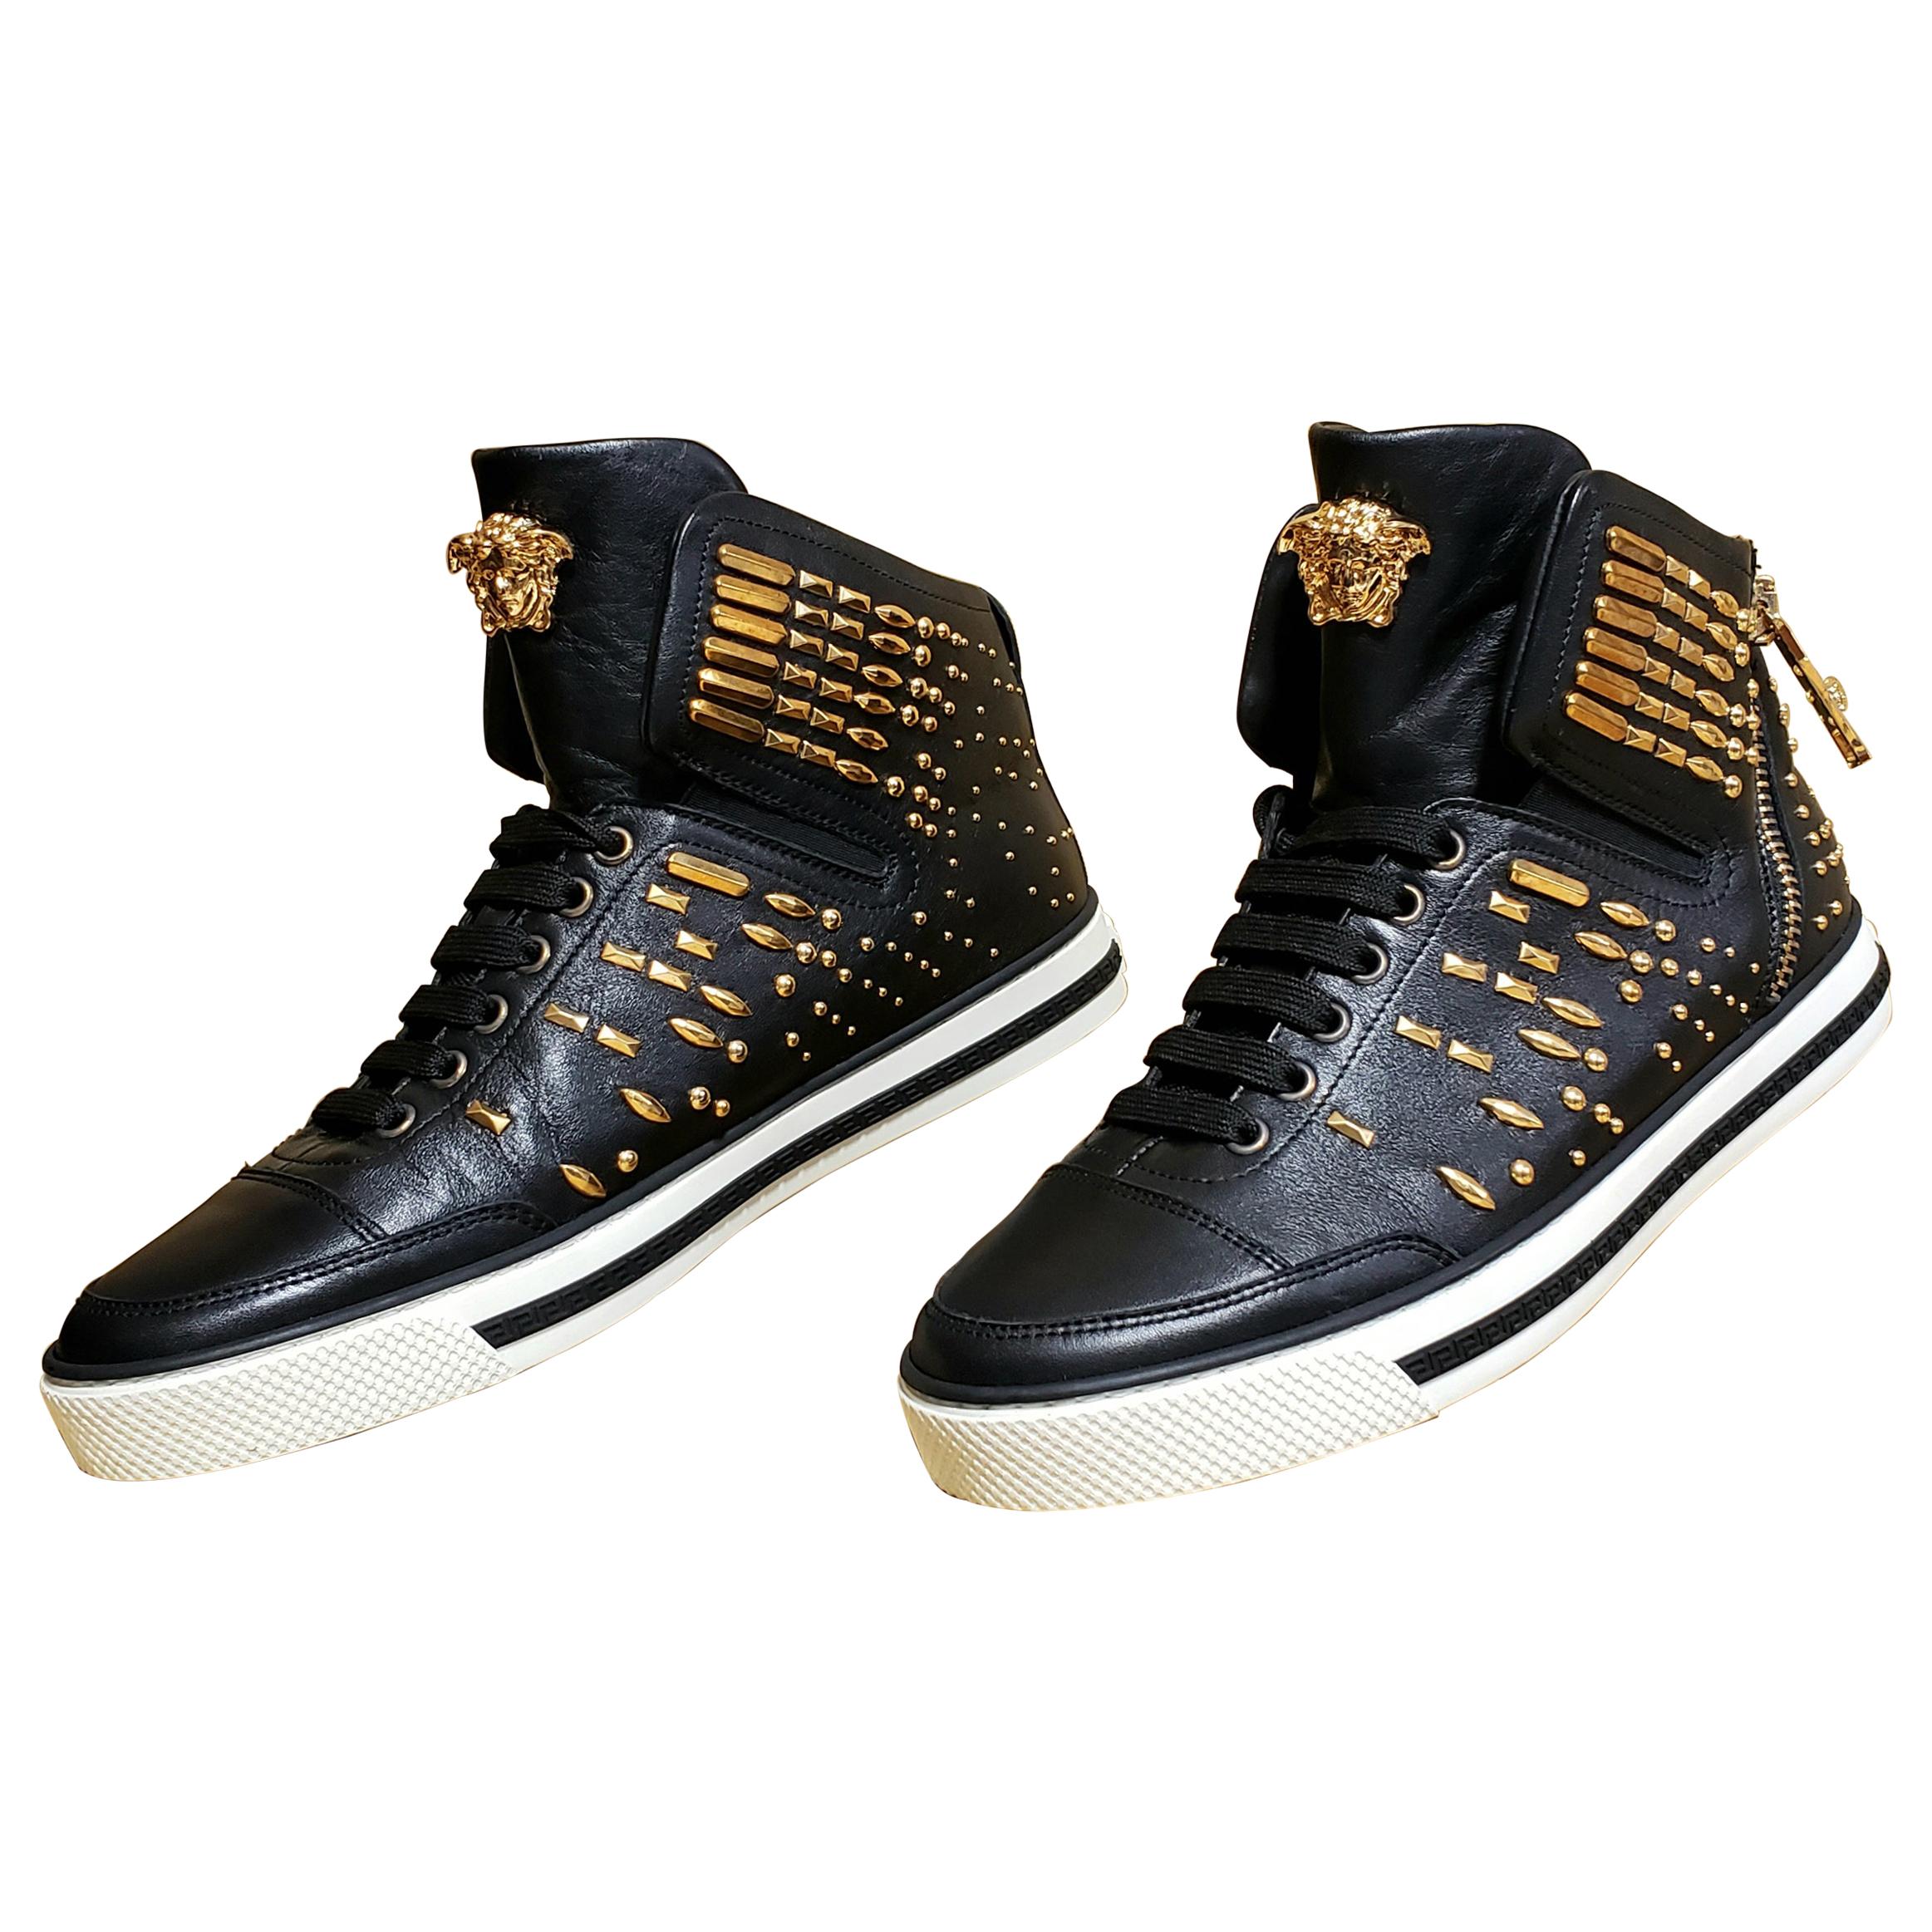 VERSACE STUDDED HIGH-TOP SNEAKERS with GOLD MEDUSA side ZIPPER at 1stDibs |  versace high top sneakers, black and gold versace shoes, black and gold  high tops